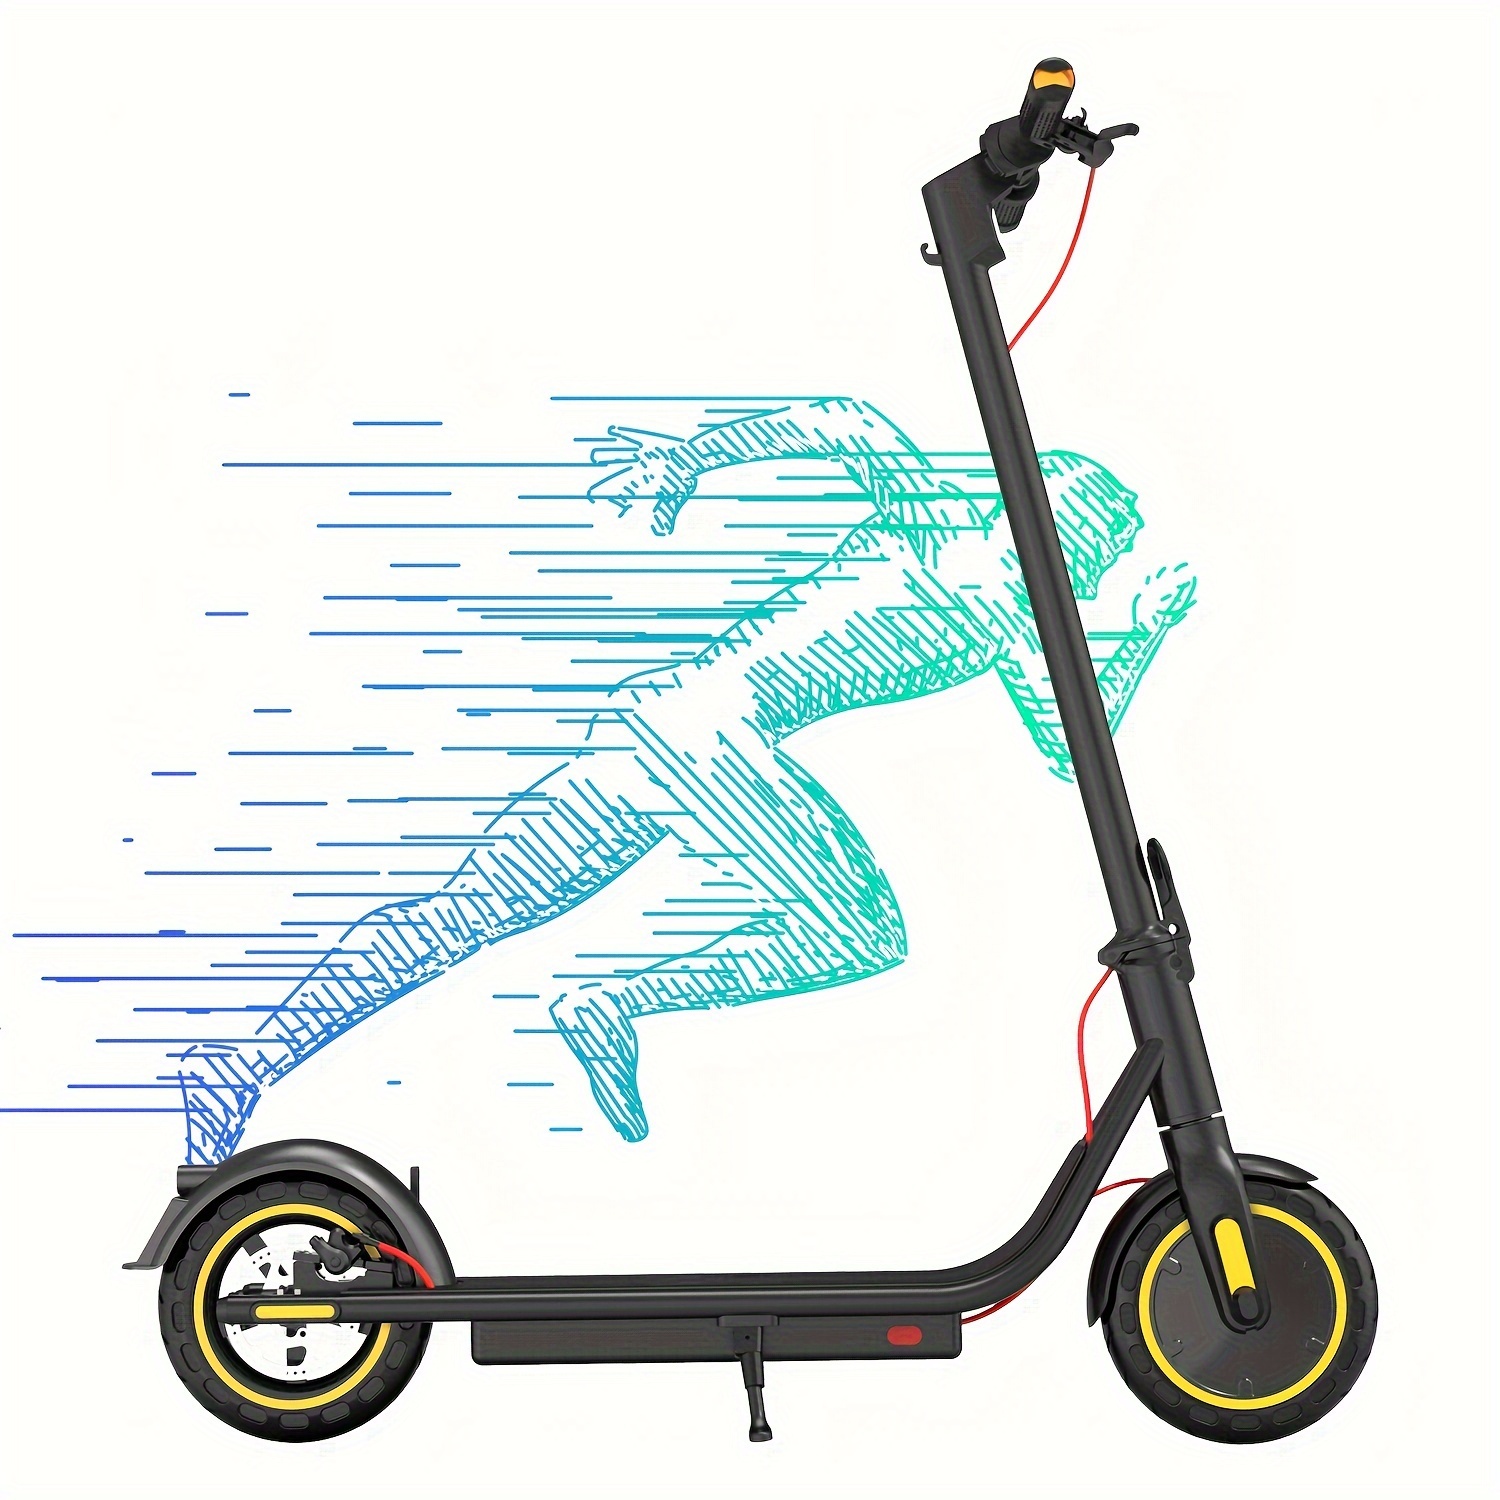 

Electric Scooter, 21 Miles Range & 19 Mph, 500w Motor, 10" Inner-support Tires, Dual Braking System And Cruise Control, With Turn Signals, Foldable Electric Scooter